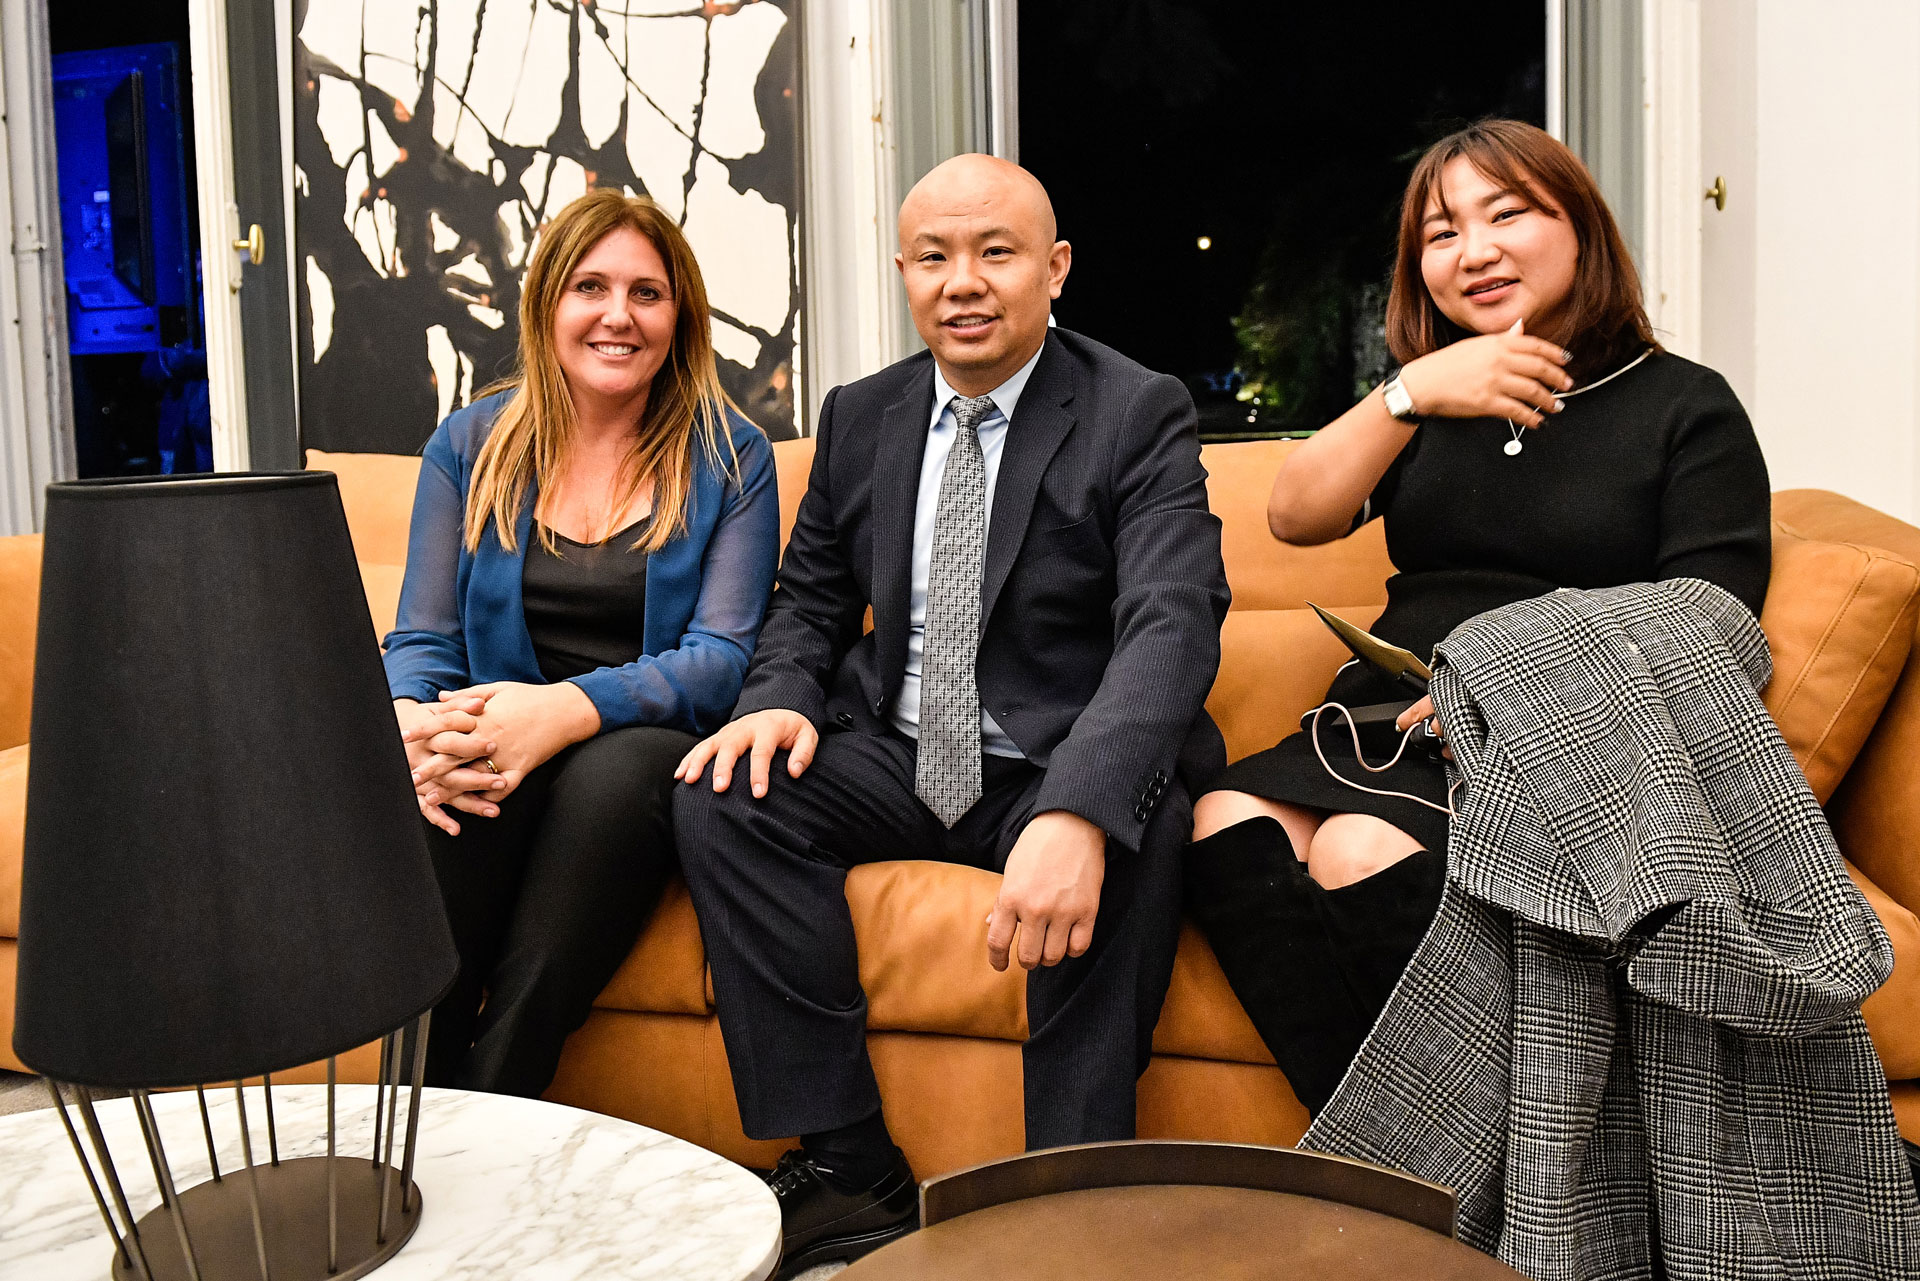 28/10/2019 Cantori at HOME Italia's event for the partnership with the Chinese Fanglin group and Aeon studio from Florence - Cantori